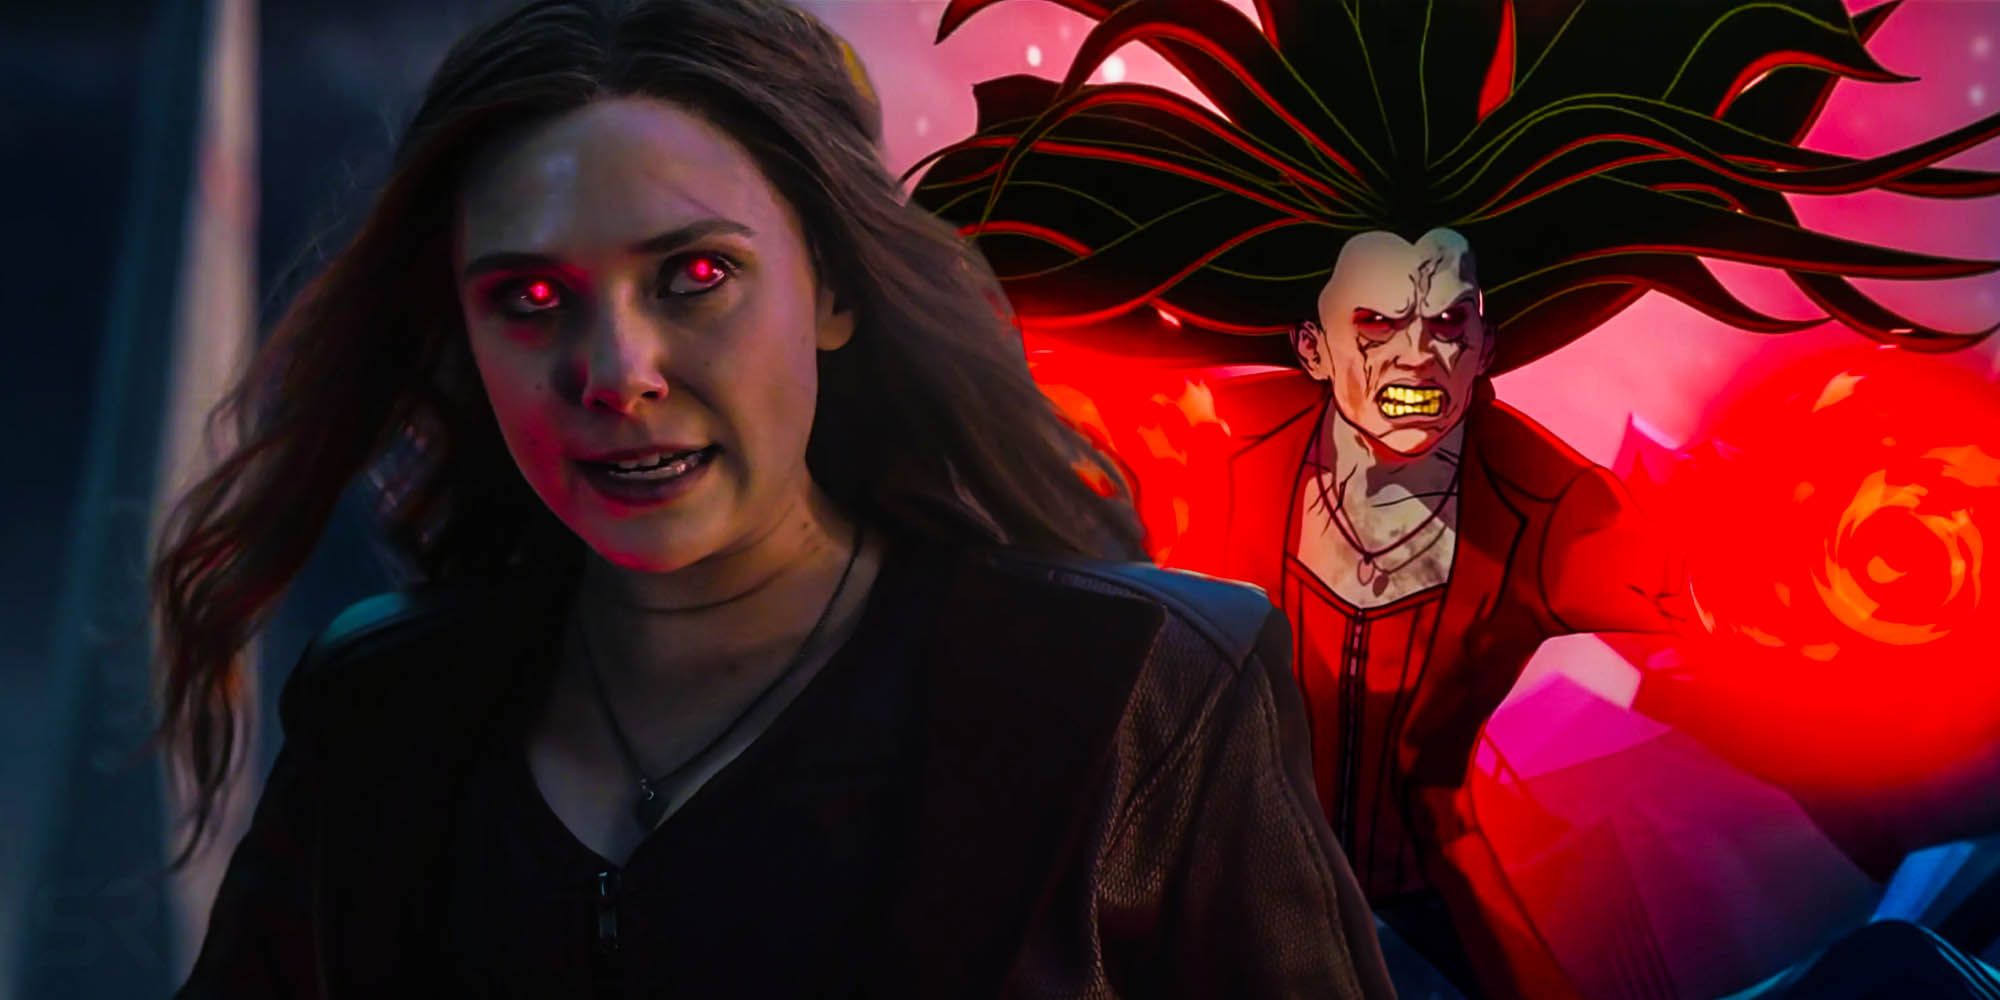 why Zombie wanda could not beat ultron but wanda could beat thanos in Avengers endgame